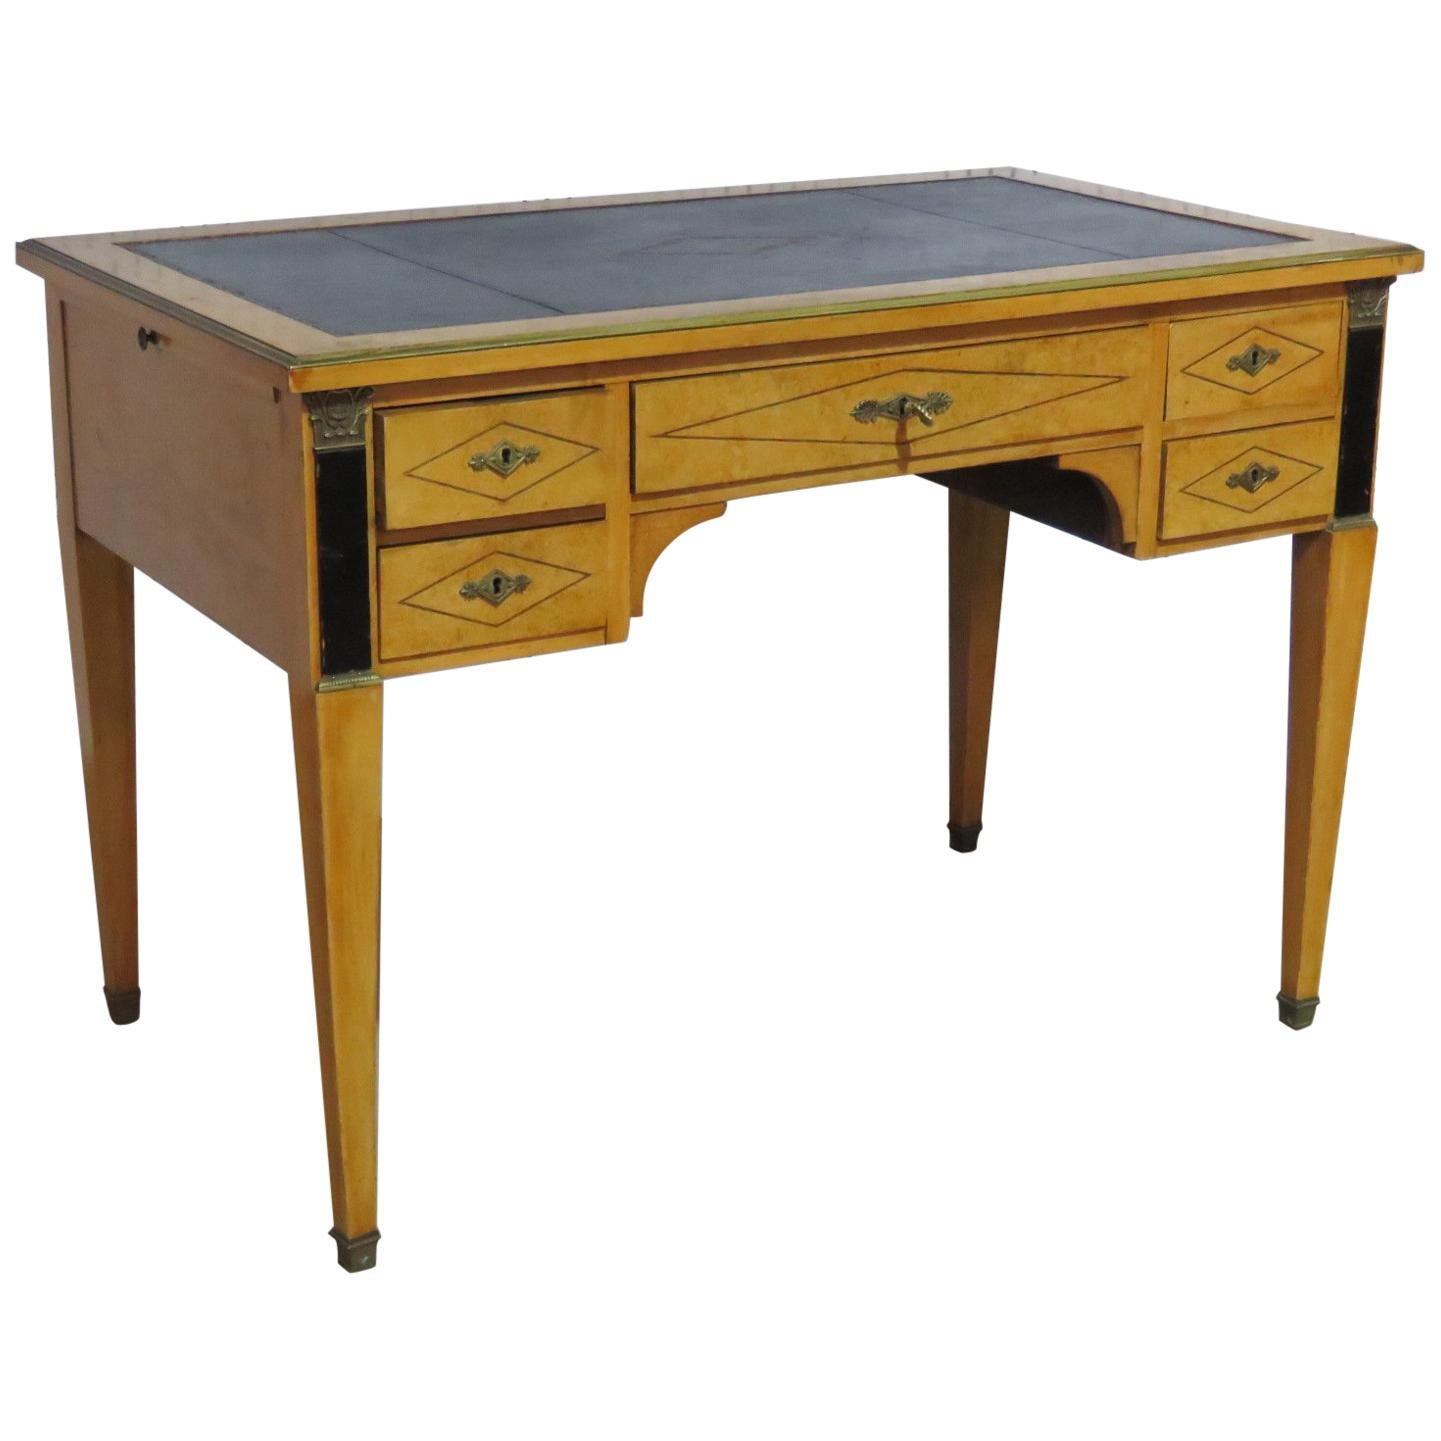 French Empire Style Brass Bound Leather Top Writing Table Desk